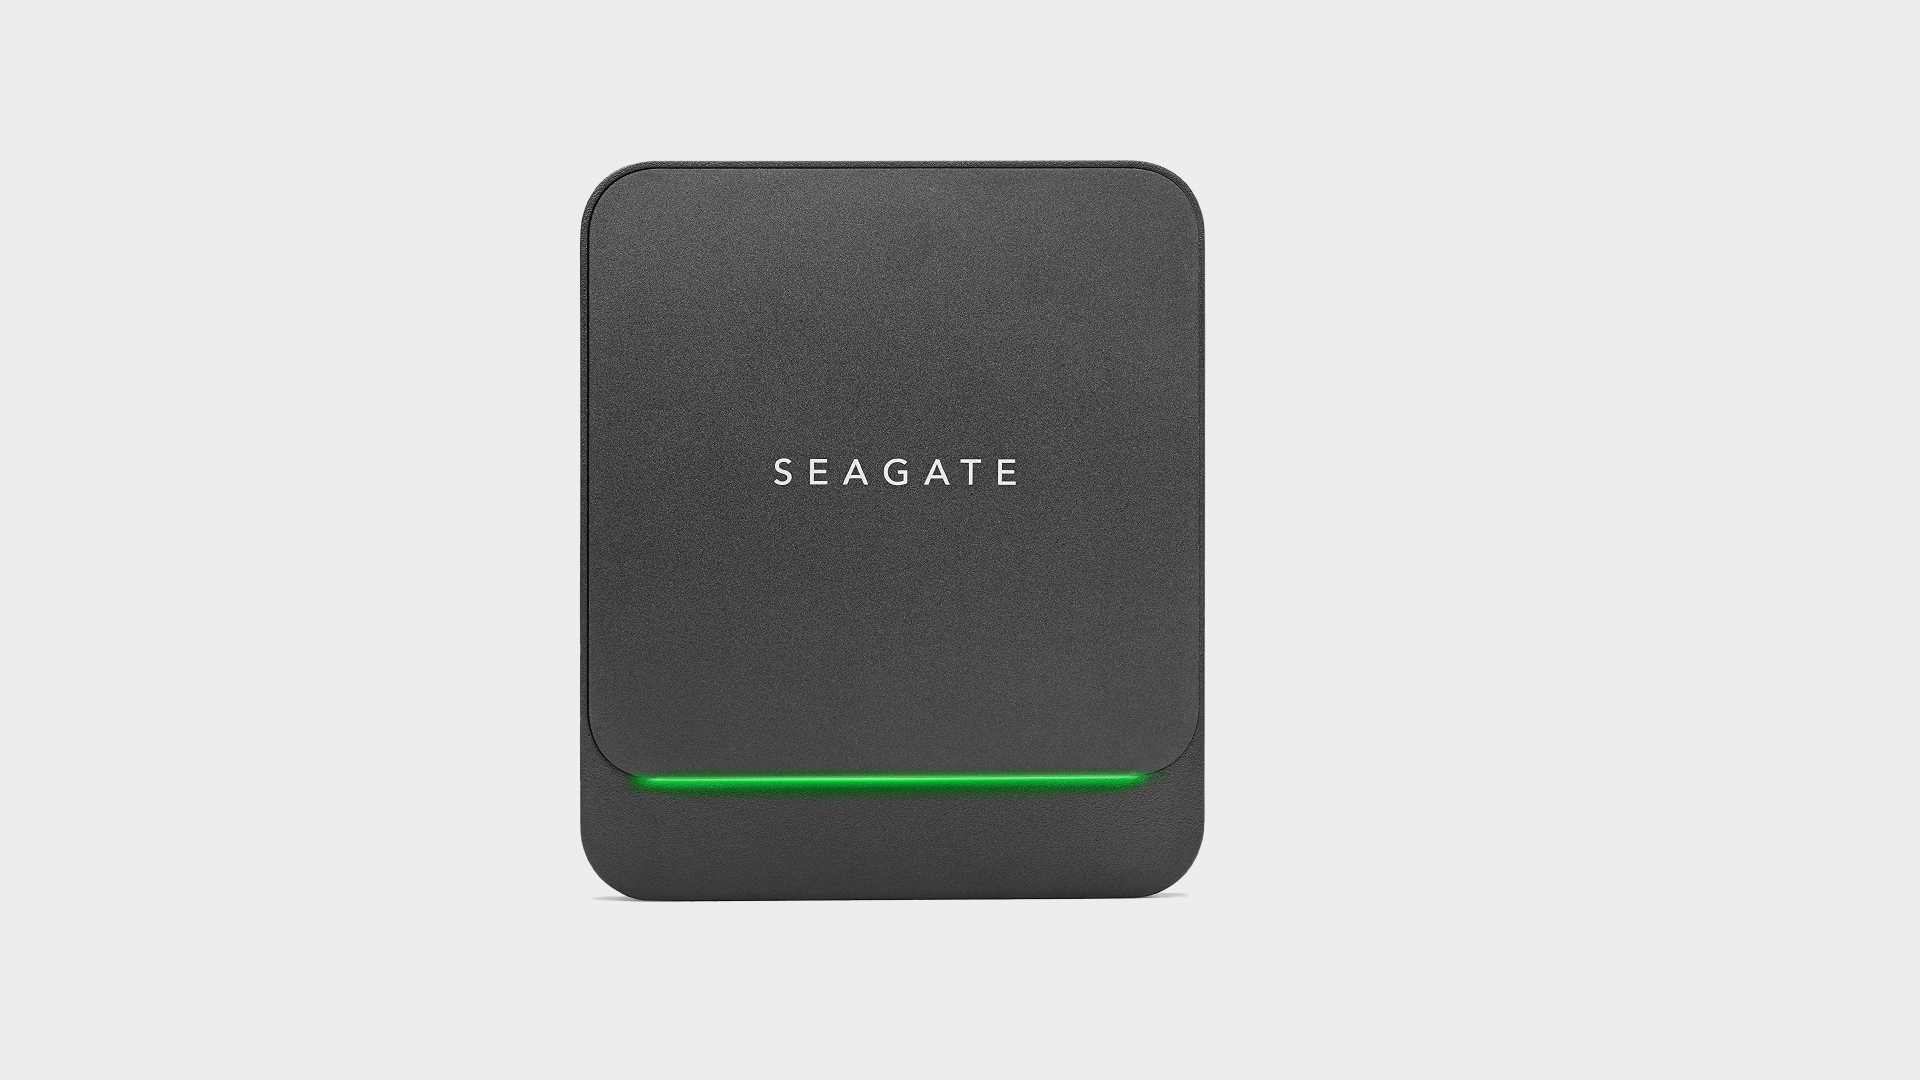 Top down shot of the Seagate Barracuda Fast SSD on a greay background